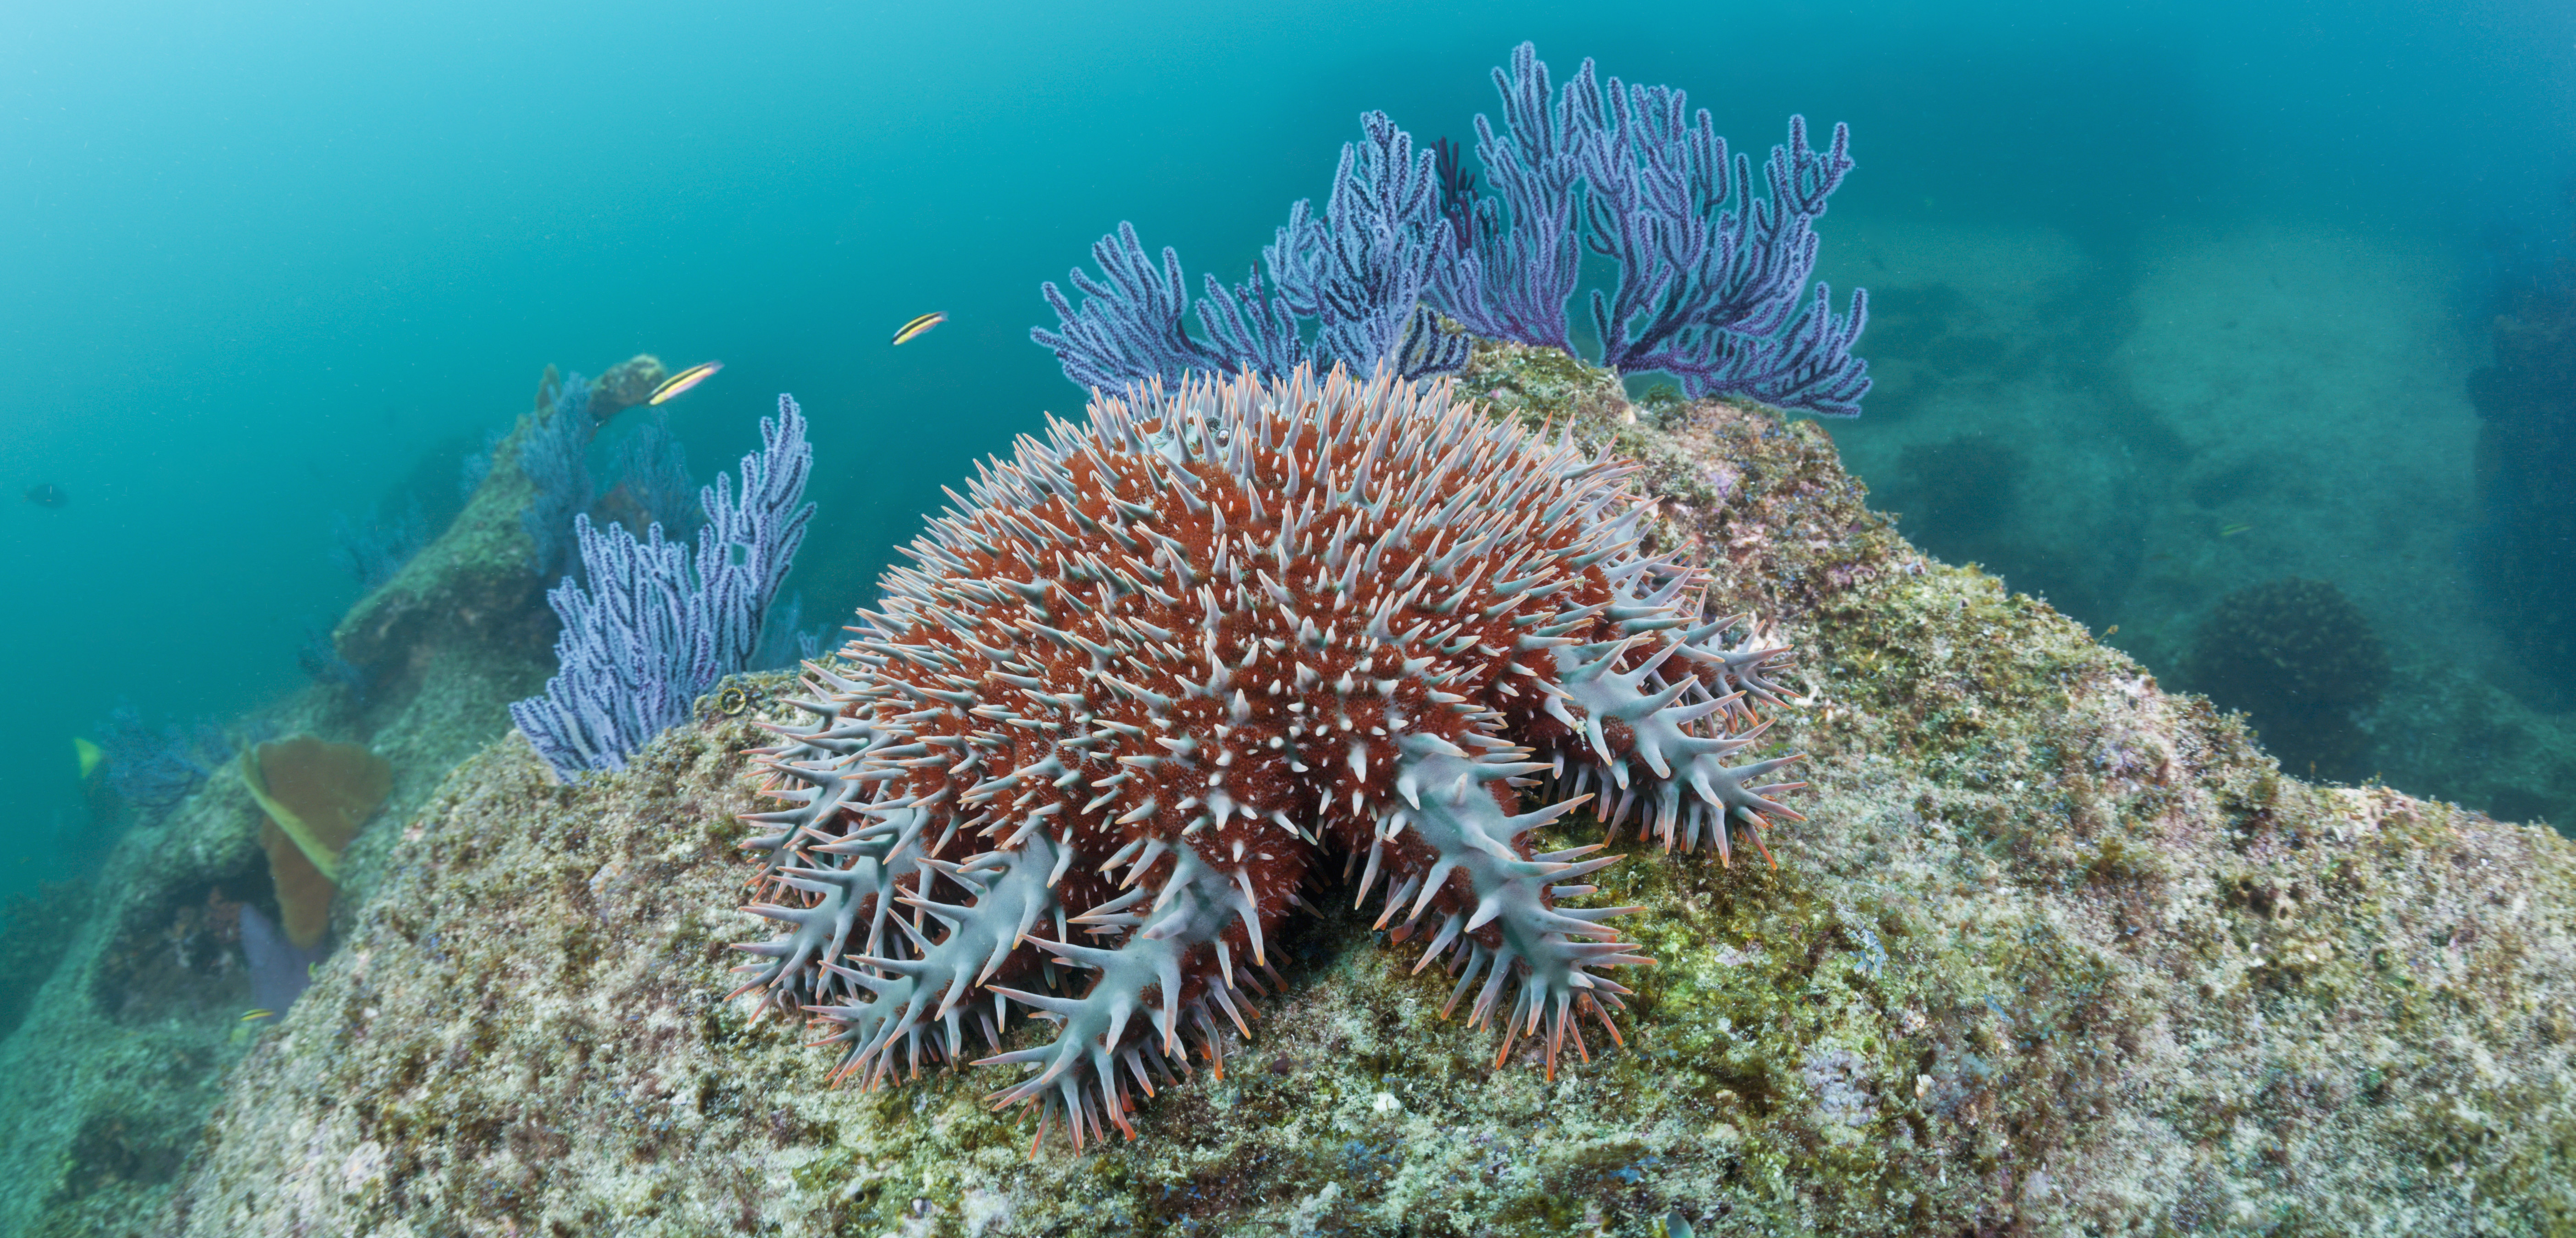 Crown-of-thorns starfish numbers are booming in the Pacific, and this is bad news for coral reefs. Photo by Reinhard Dirscherl/Reinhard Dirscherl/Look-foto/Corbis